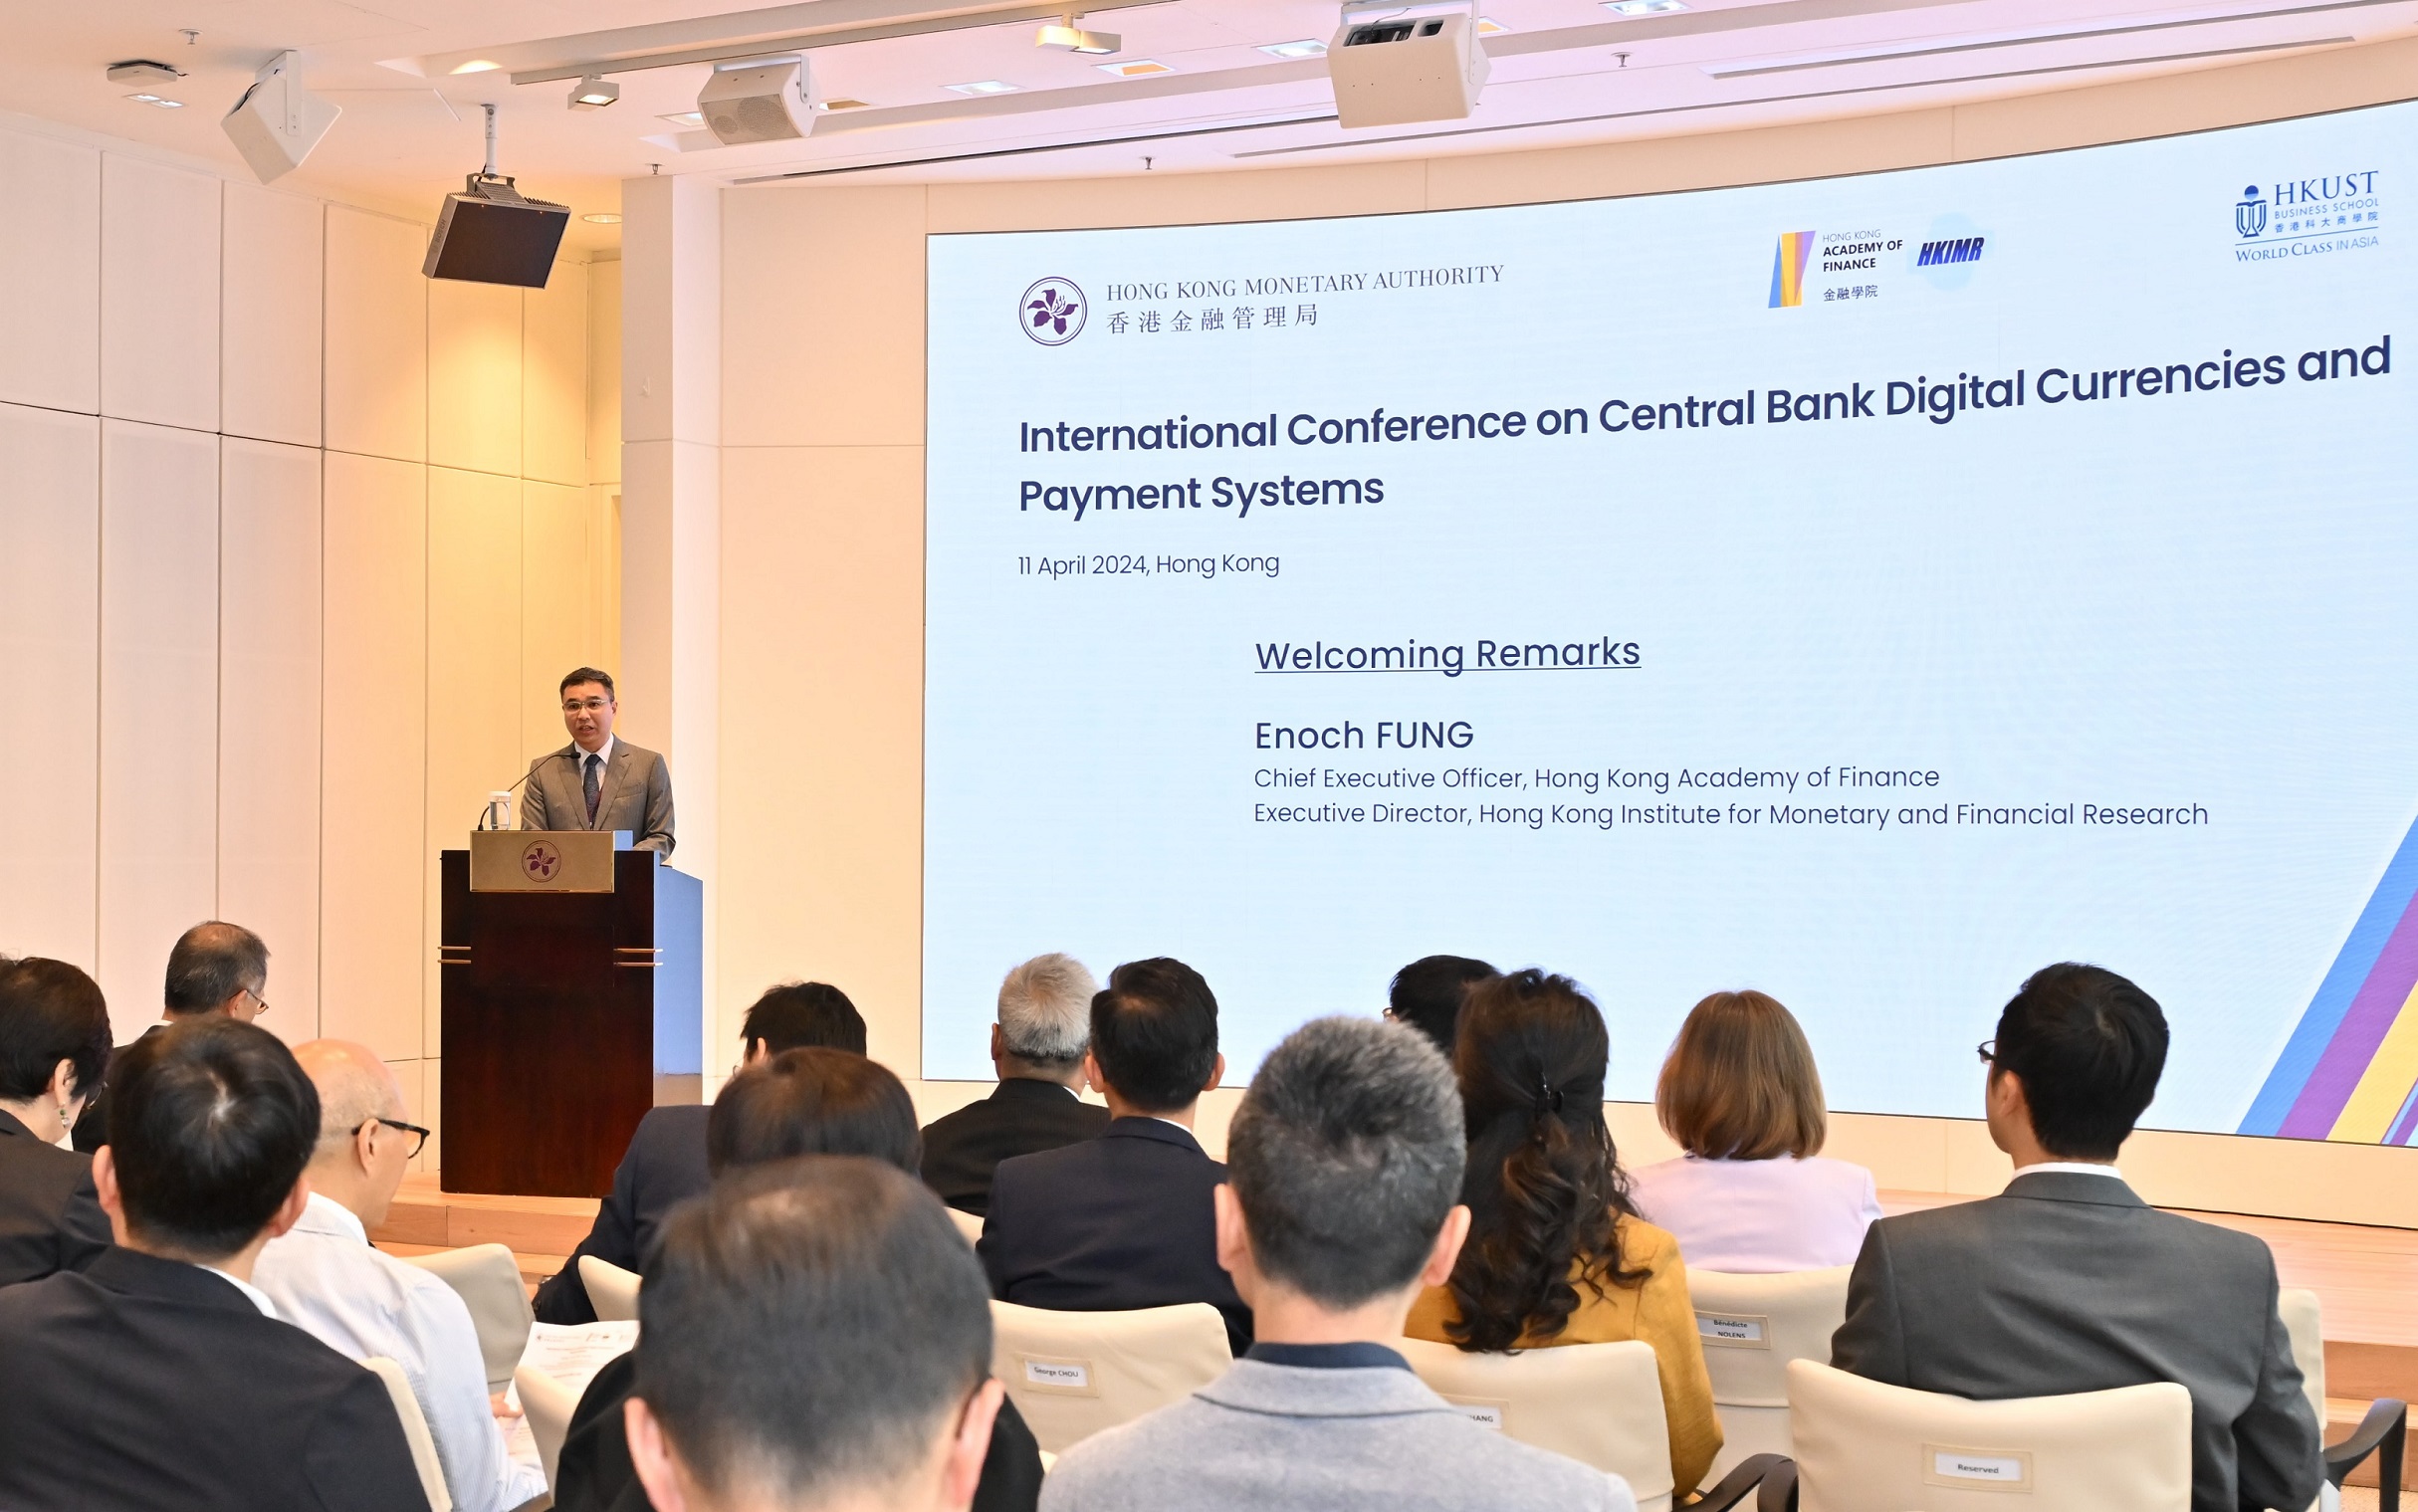 Mr Enoch Fung, Chief Executive Officer of the Hong Kong Academy of Finance and Executive Director of the Hong Kong Institute for Monetary and Financial Research, delivers welcoming remarks at the International Conference on Central Bank Digital Currencies and Payment Systems.